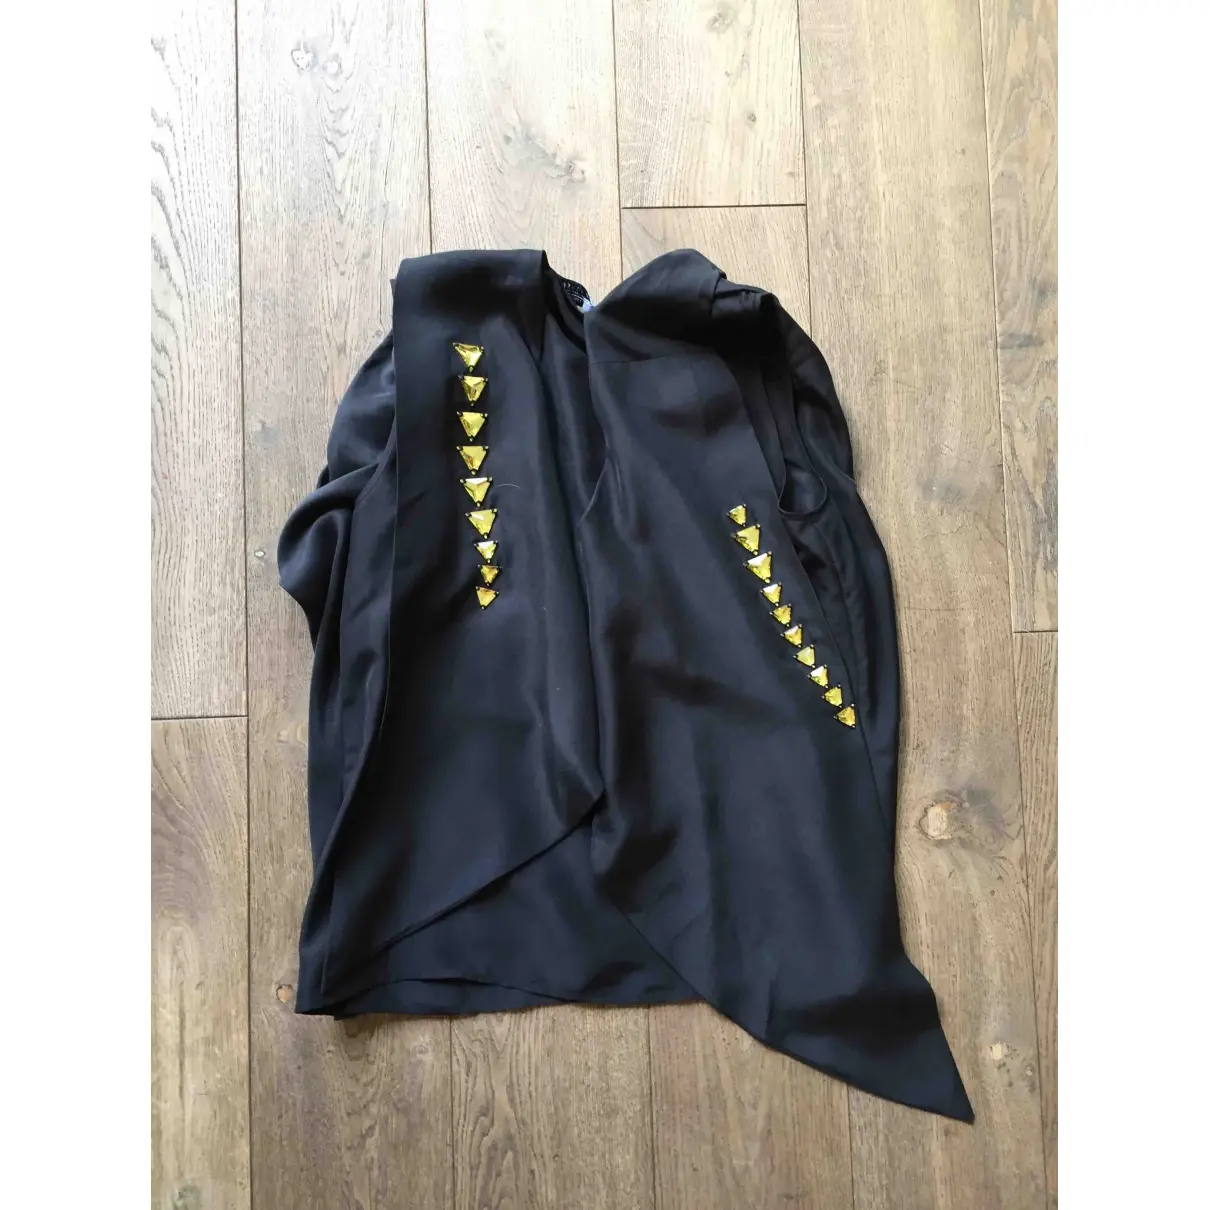 Buy Givenchy Silk top online